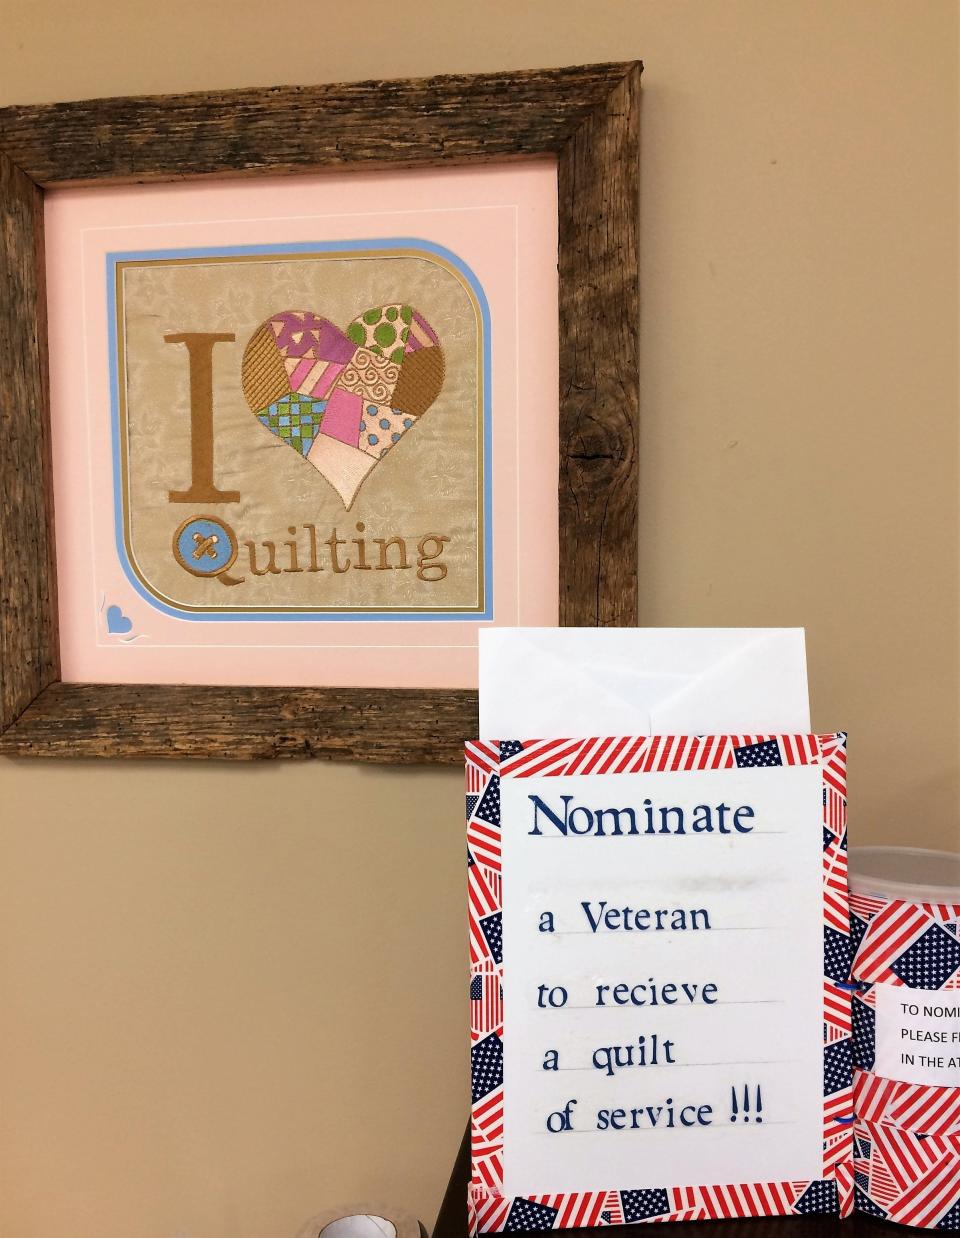 Quilting groups across the country have taken on projects to make lap quilts for veterans, including the House Mountain Quilt Guild.